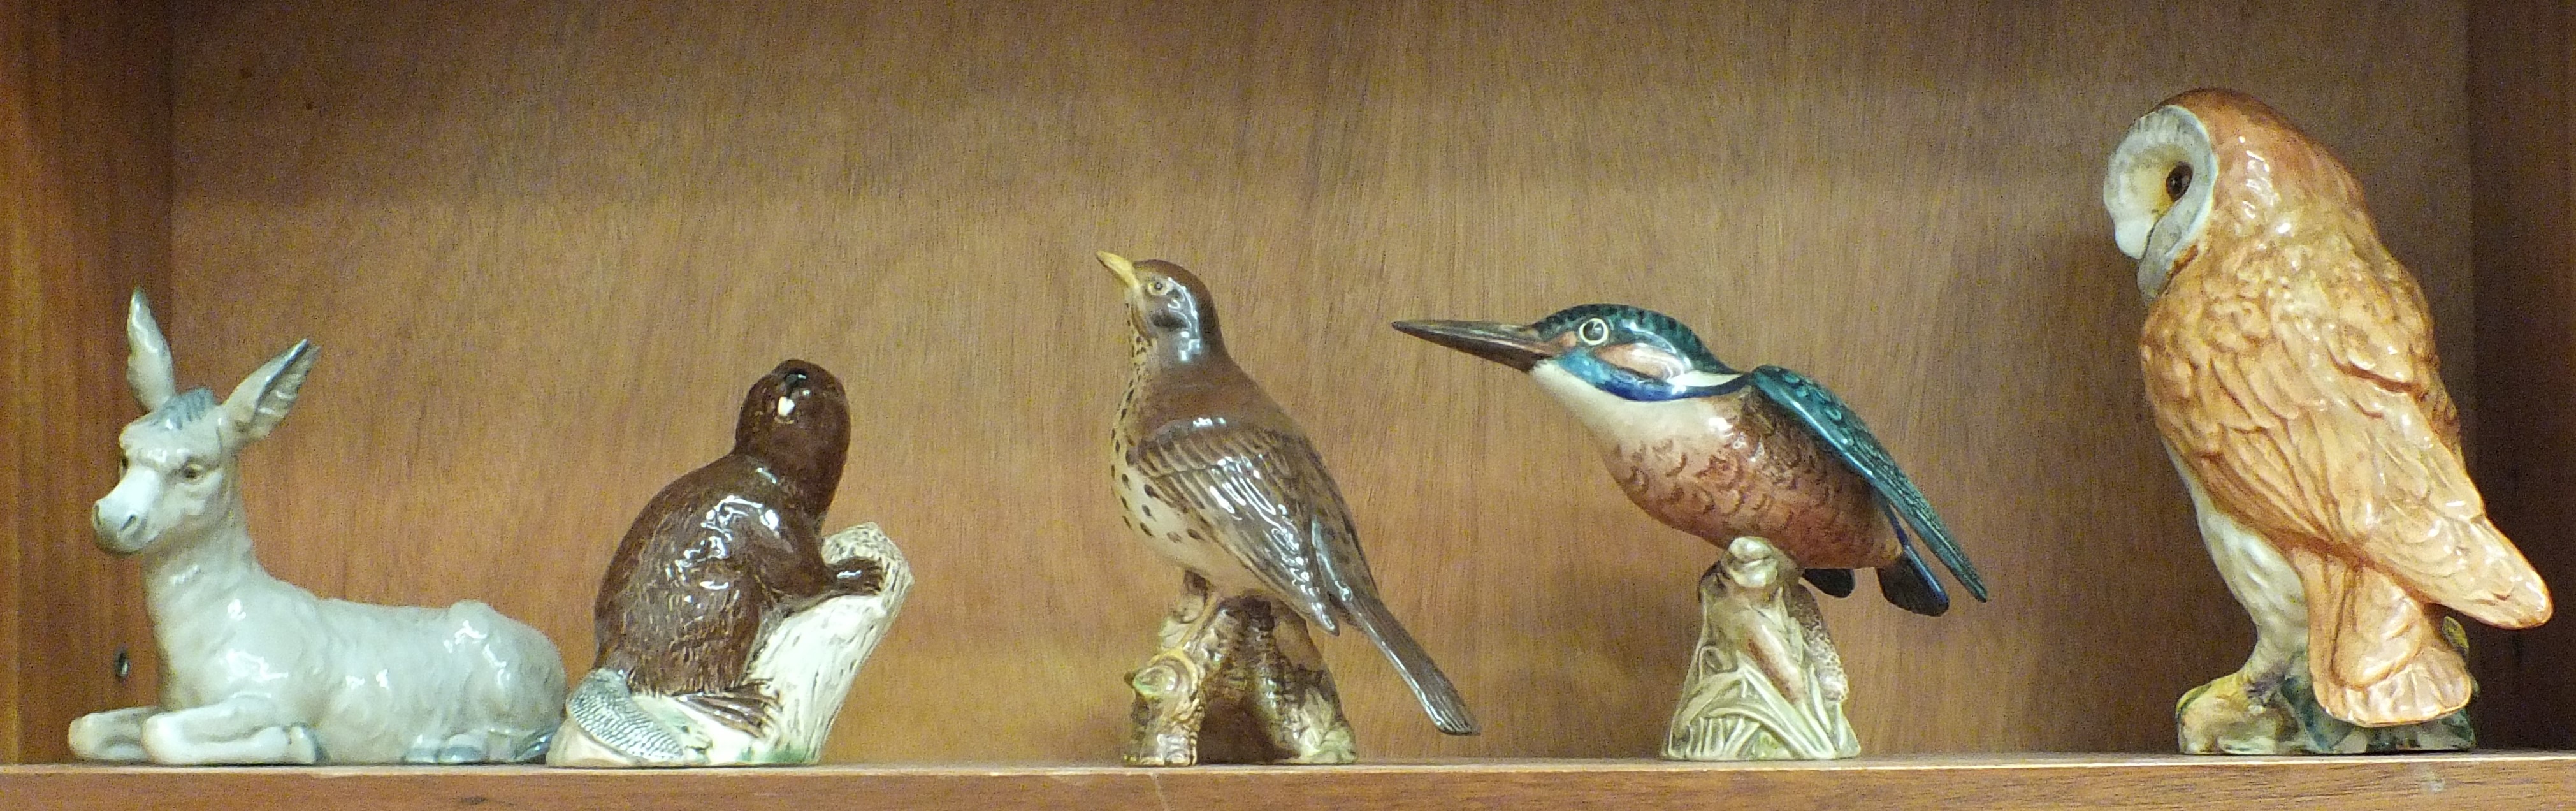 A Beswick model of a Thrush 2308, Beaver 2195, Kingfisher 2371, Barn Owl 1046 and a Nao model of a